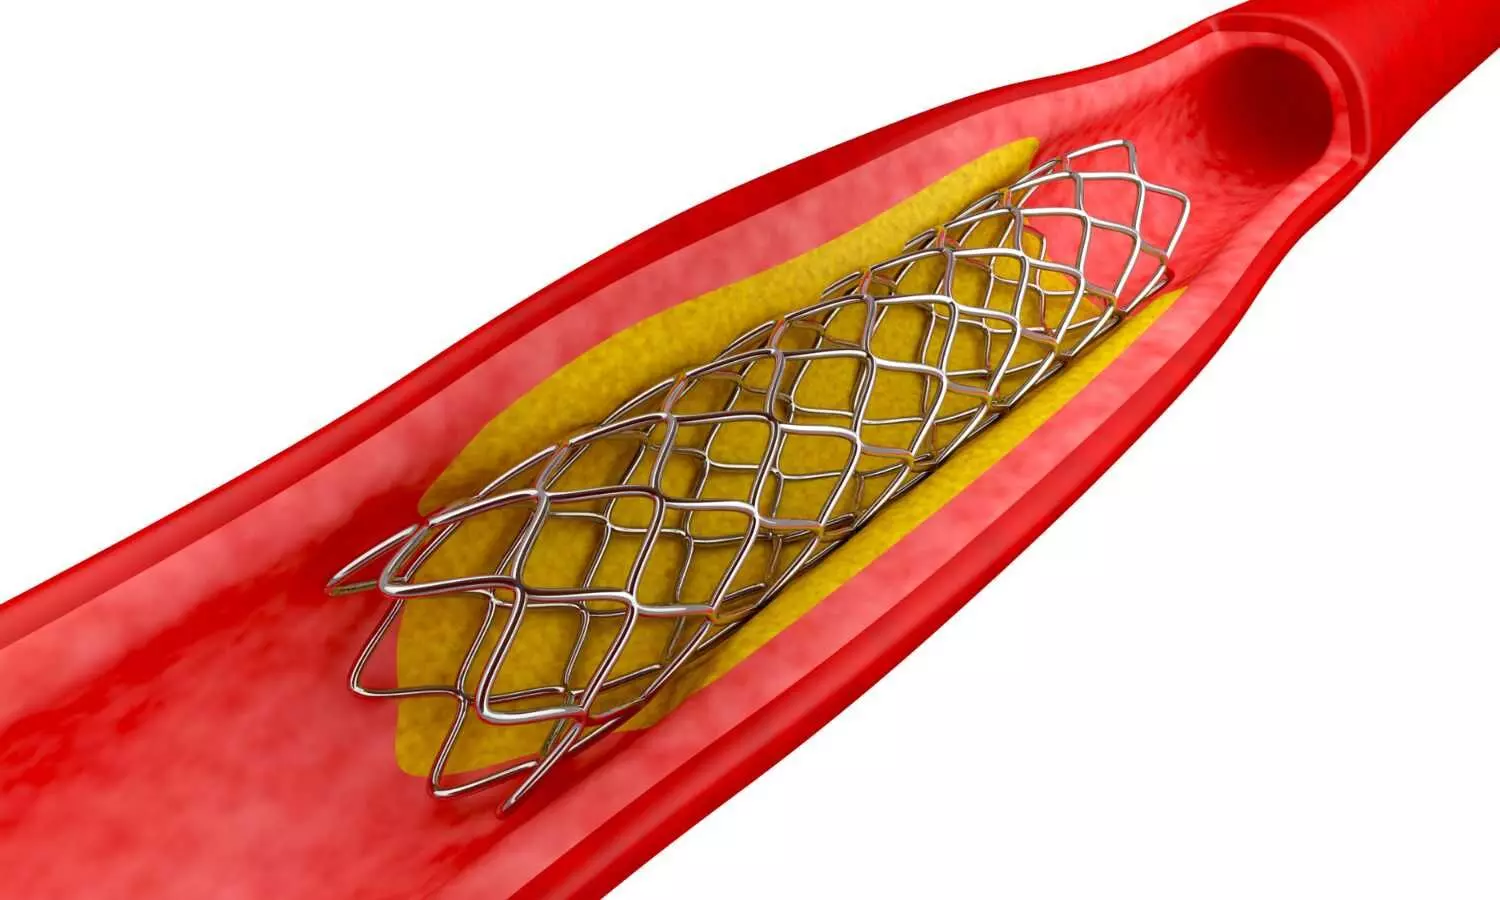 Coronary stents now included in NLEM 2022